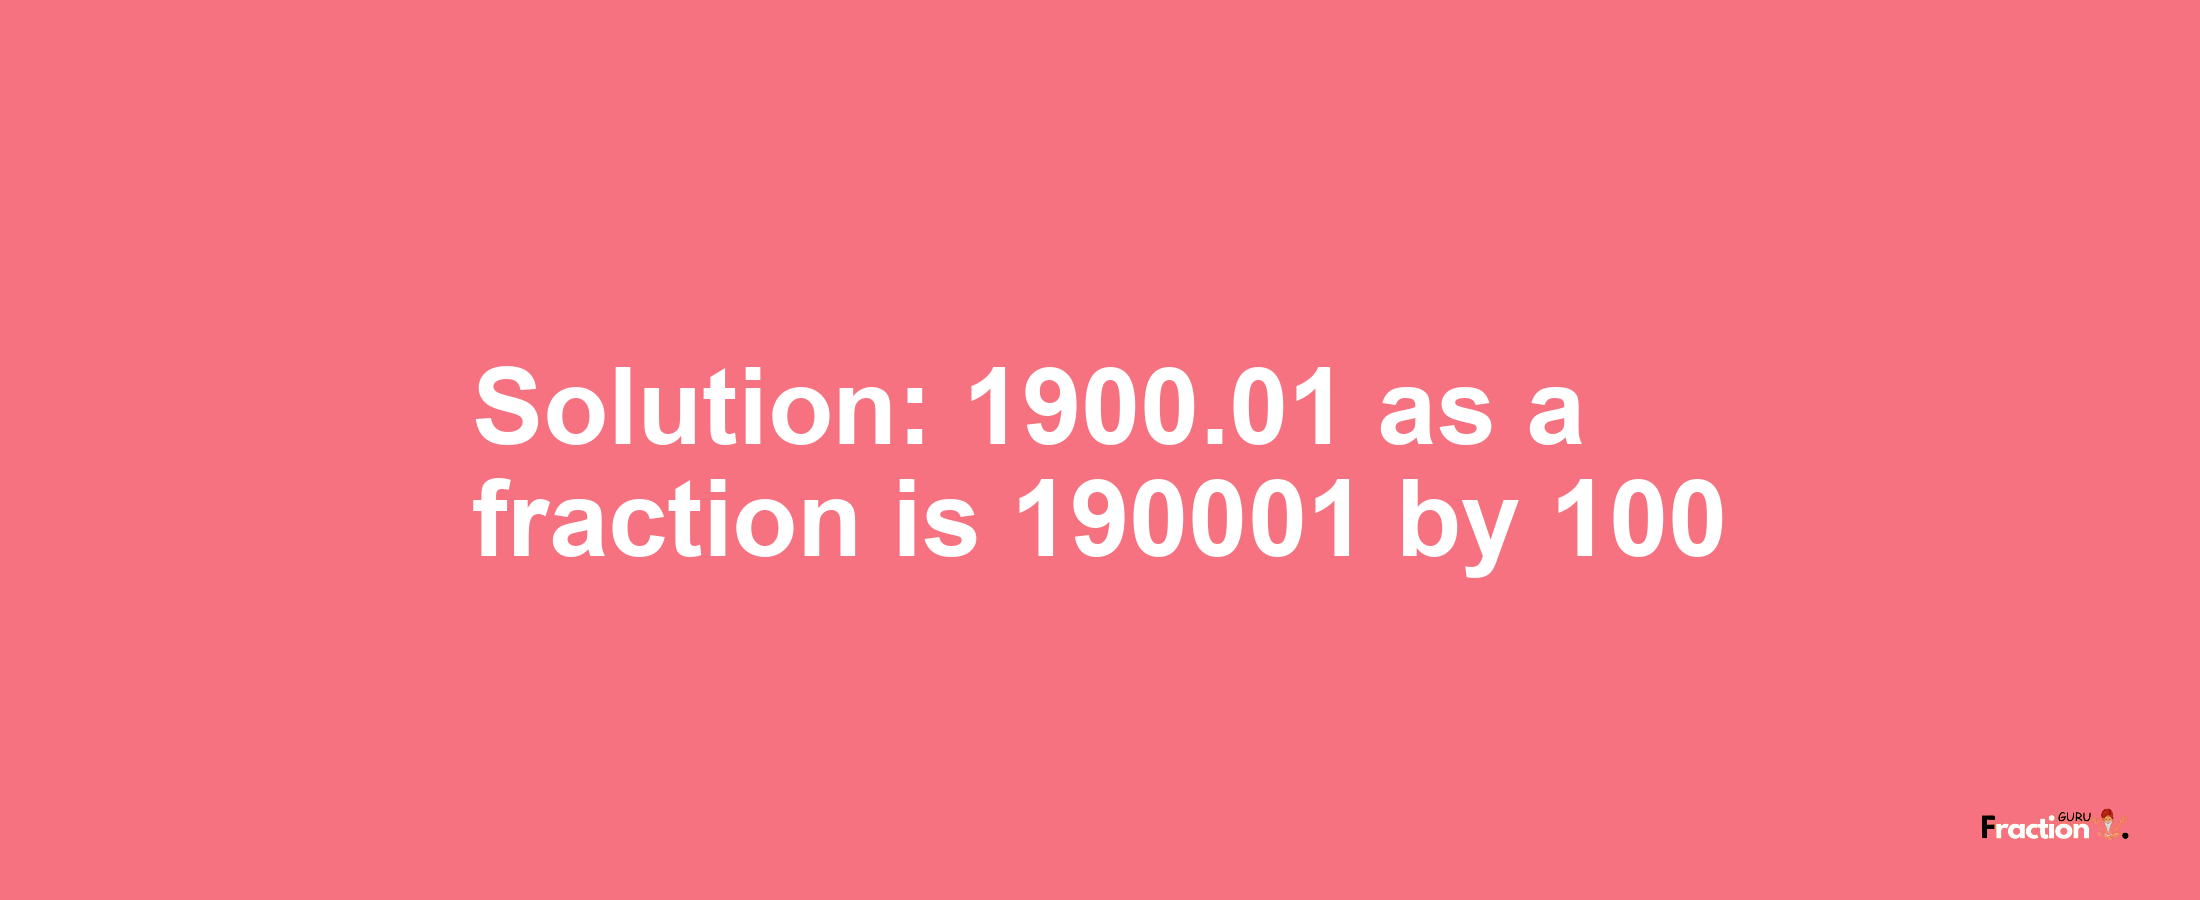 Solution:1900.01 as a fraction is 190001/100